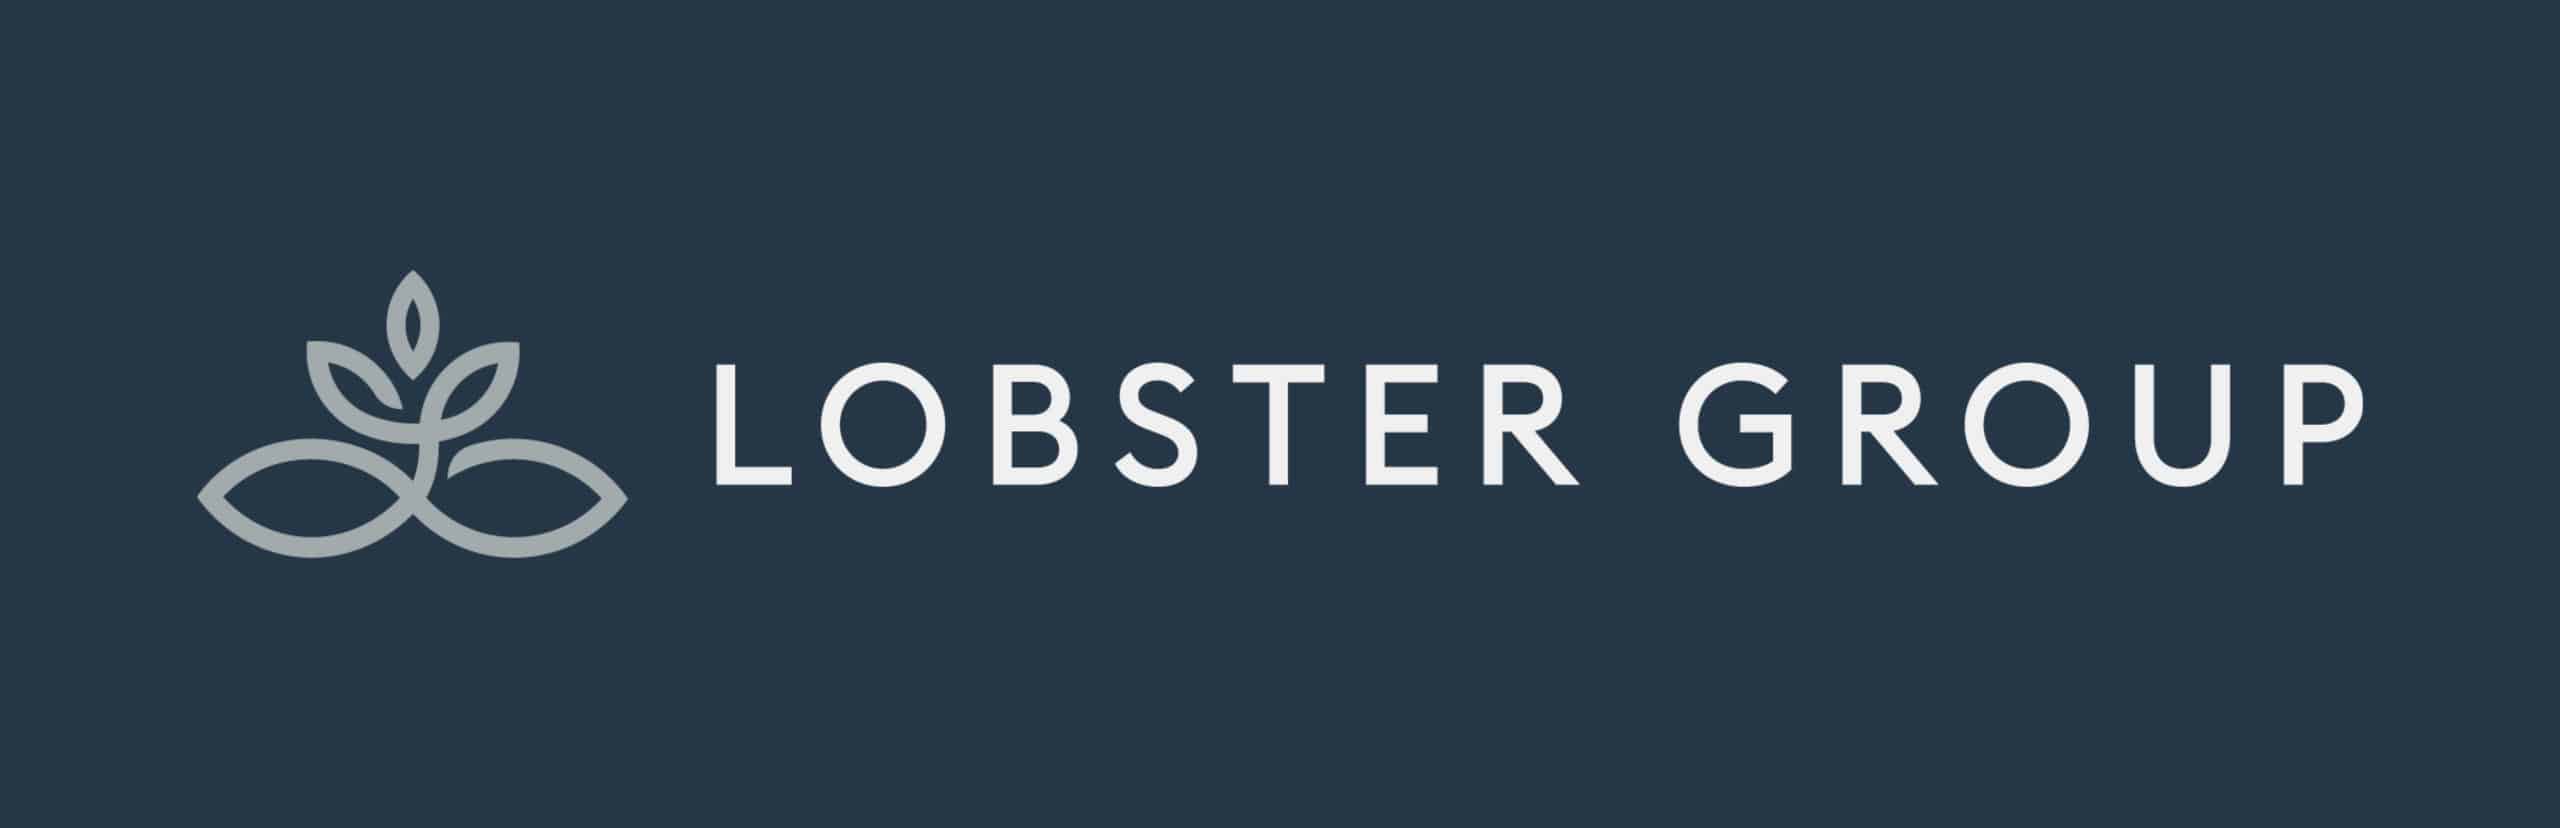 Lobster group